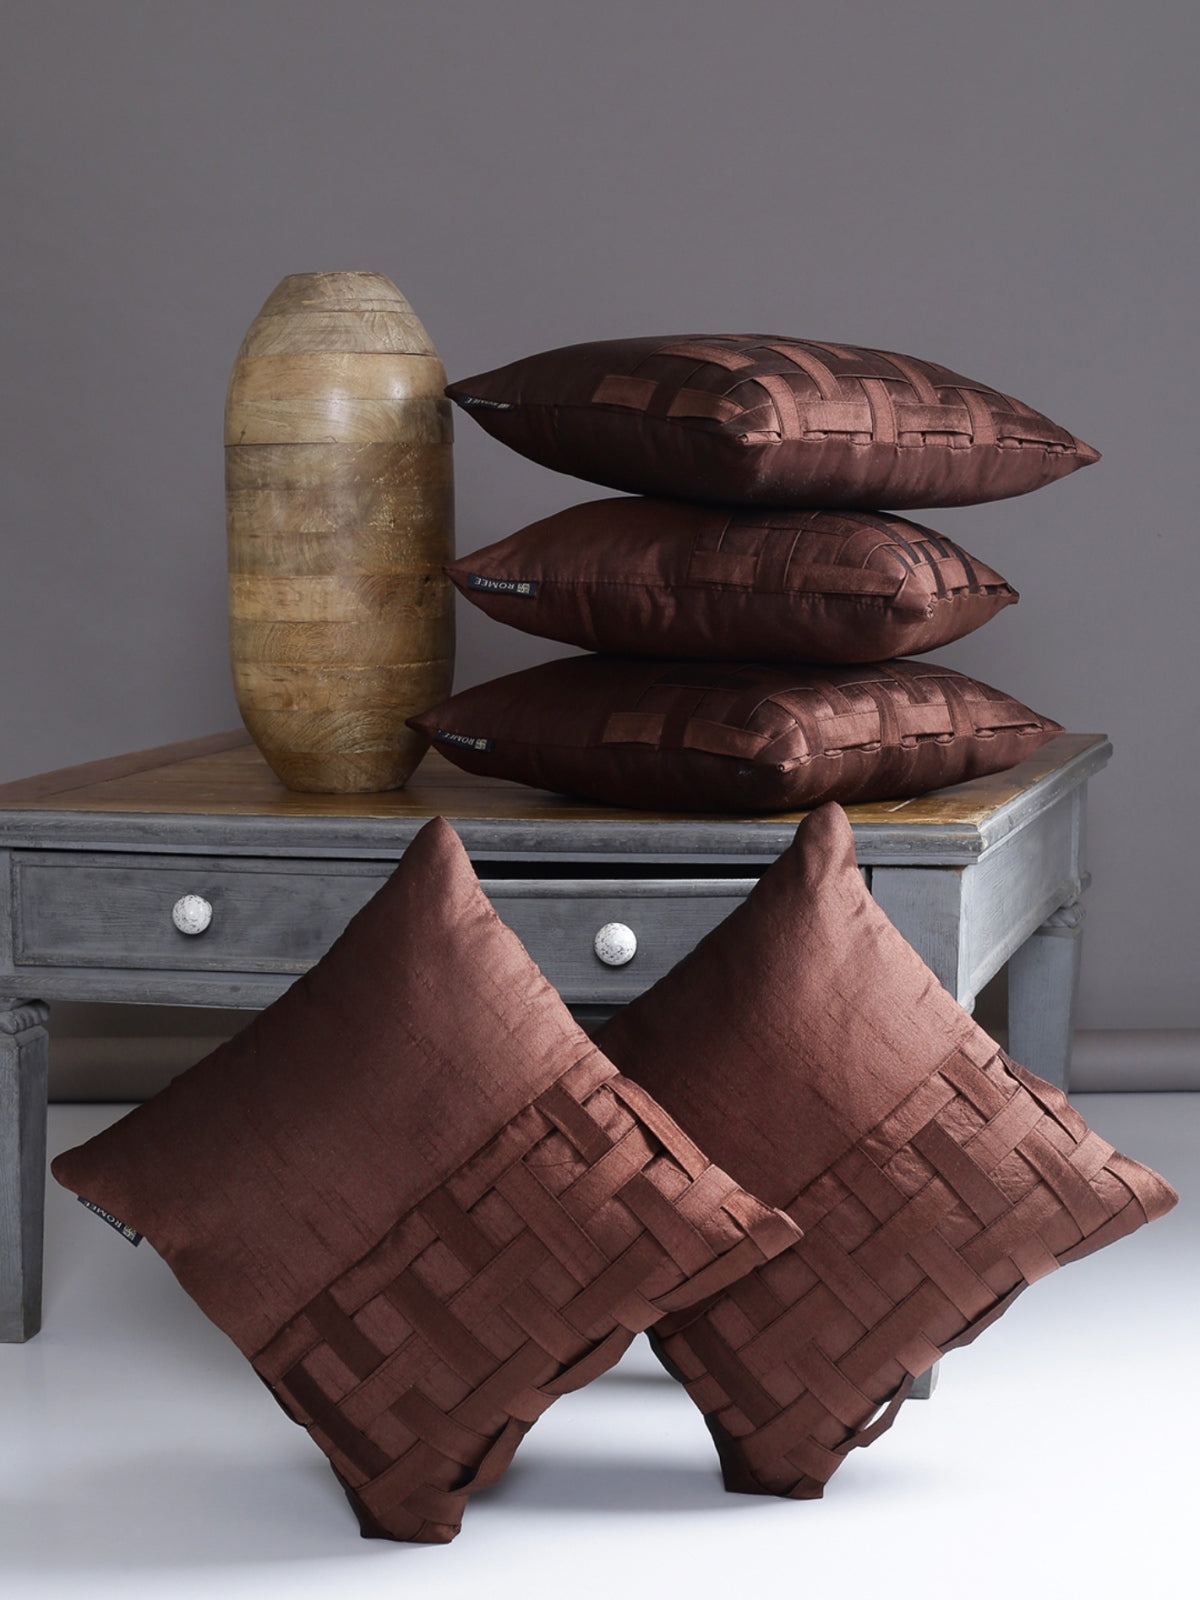 Polyester Designer Solid Plain Cushion Cover 16 inch x 16 inch, Set of 5 - Brown